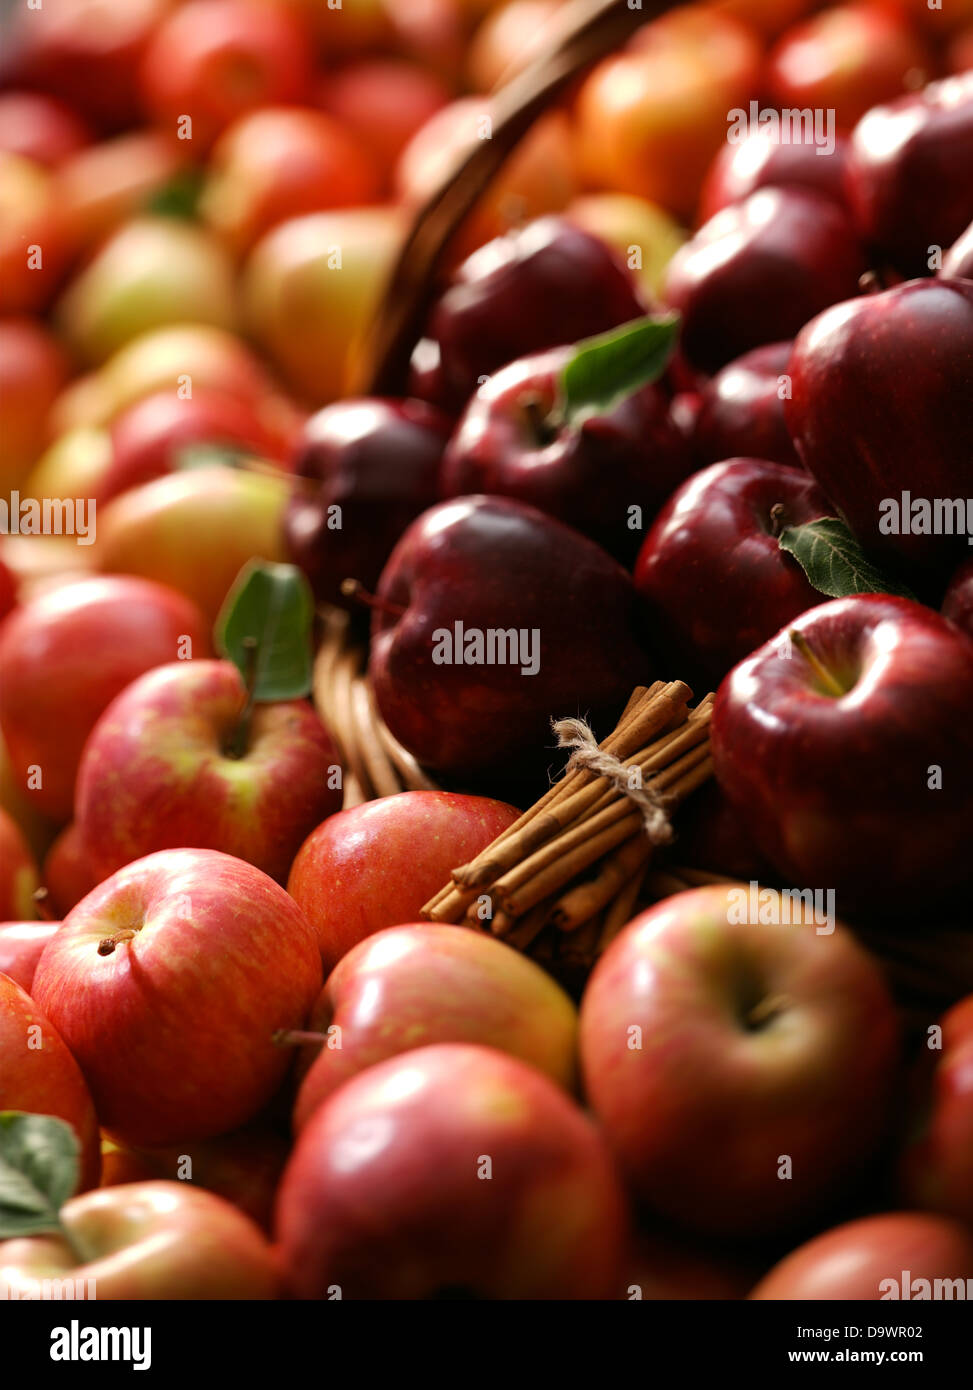 apple stand Stock Photo